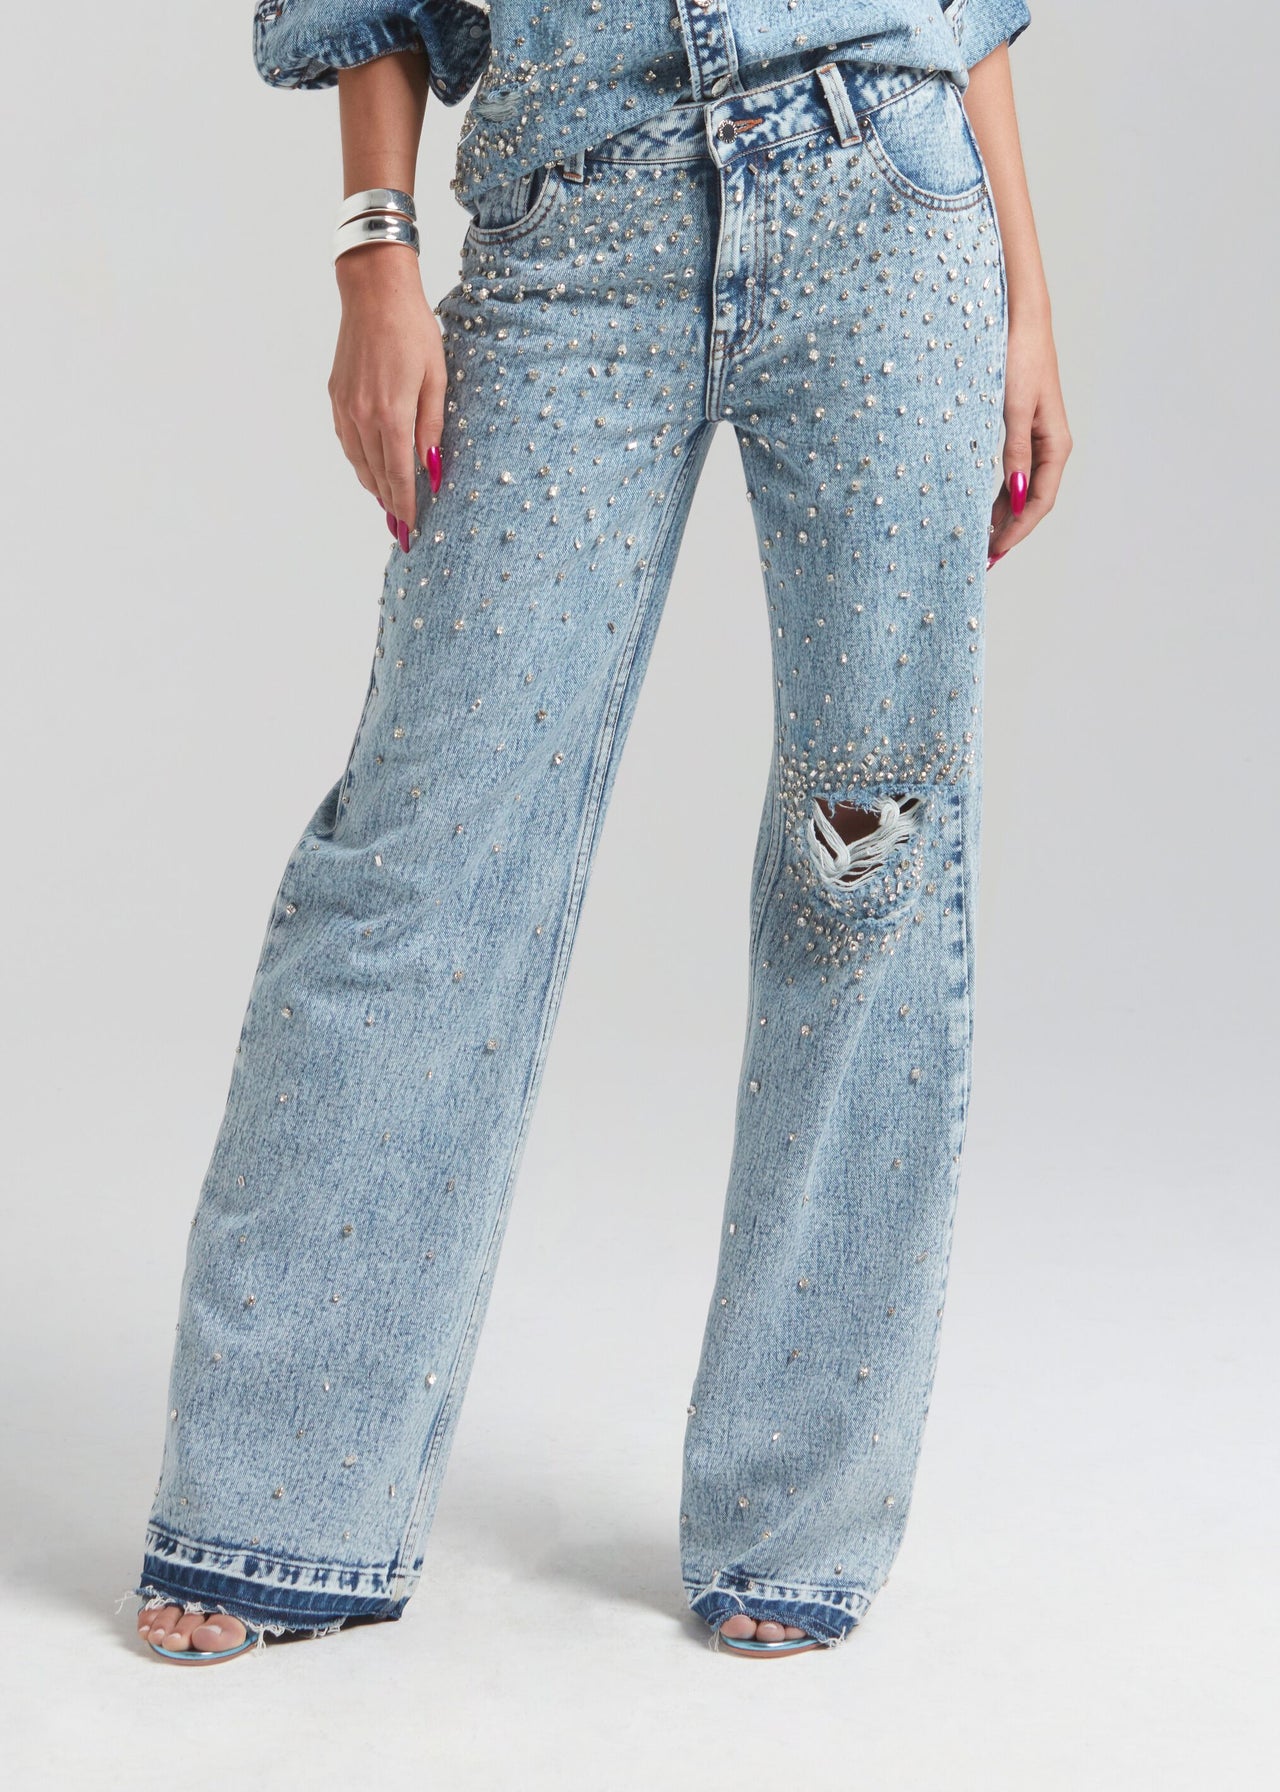 Stylish & Hot ladies rhinestone jeans at Affordable Prices 